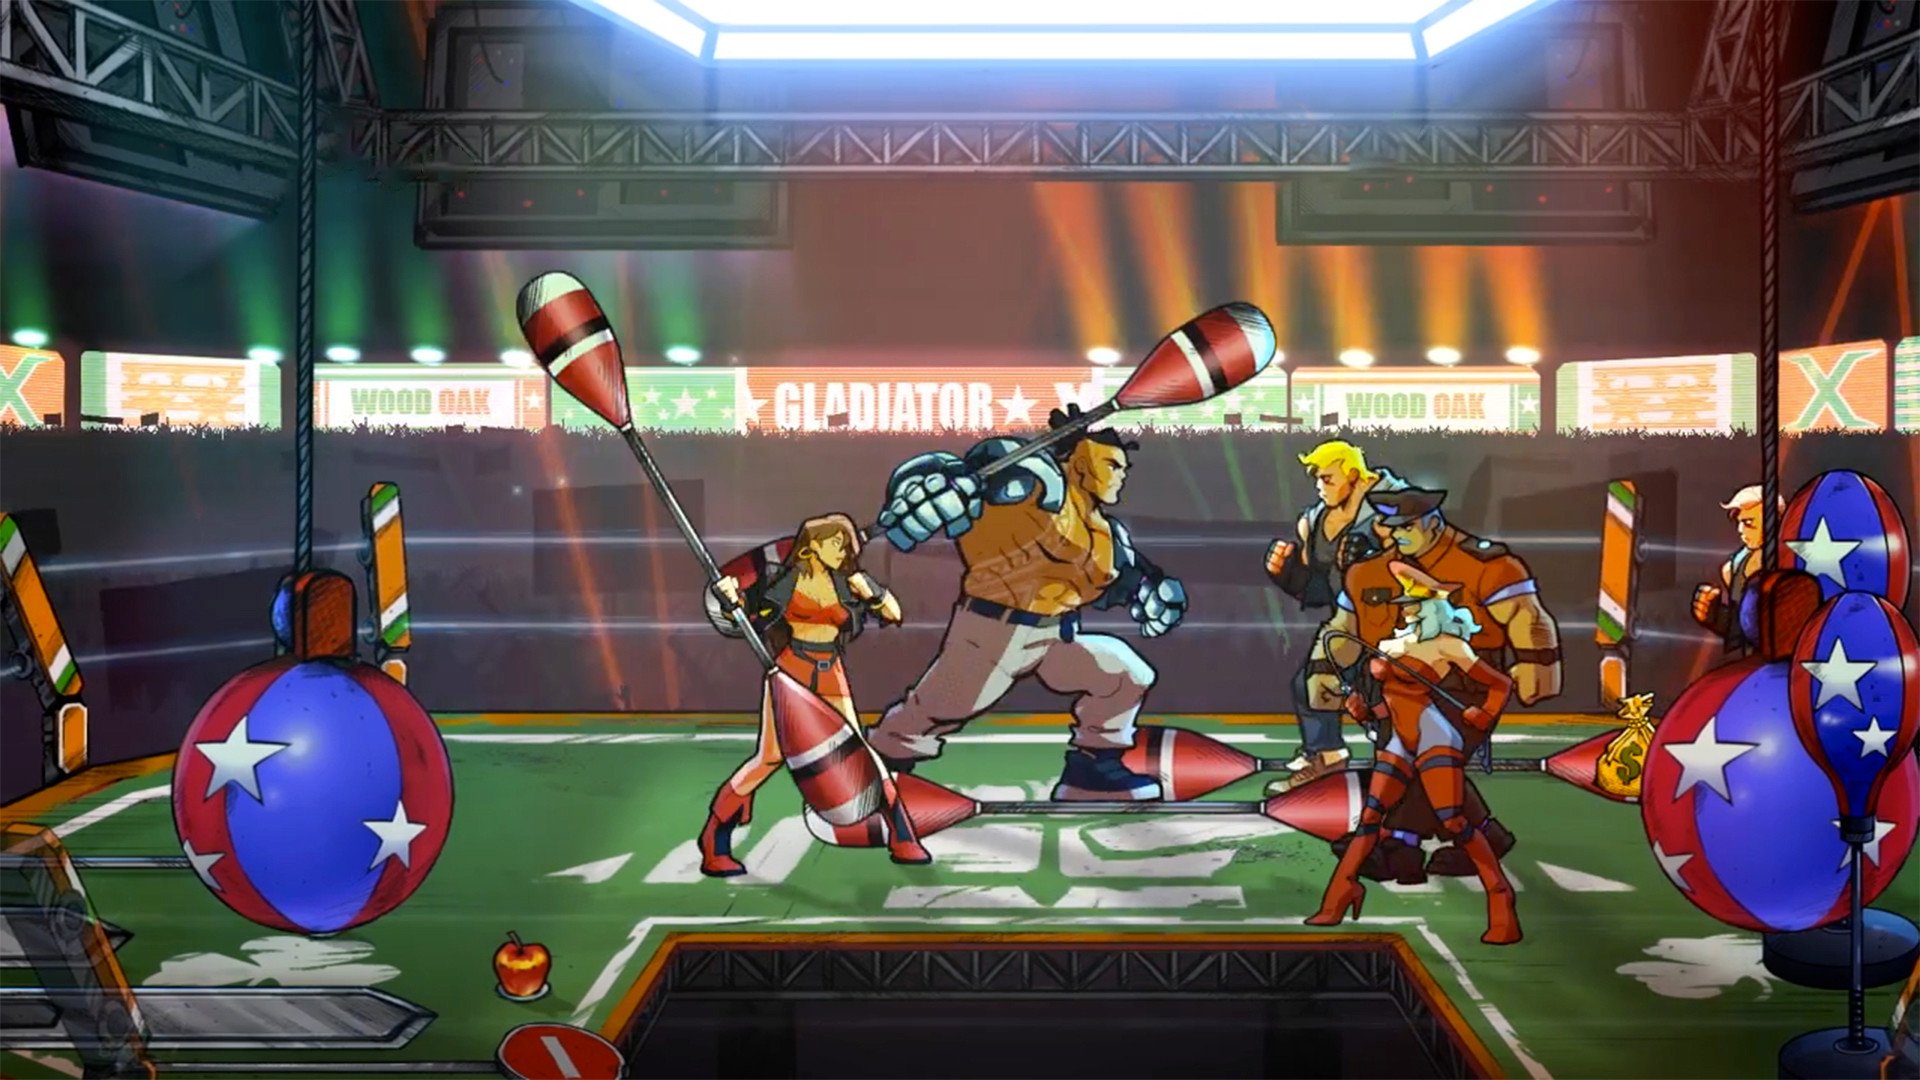 Various characters fighting in a boxing ring with punch bags around them